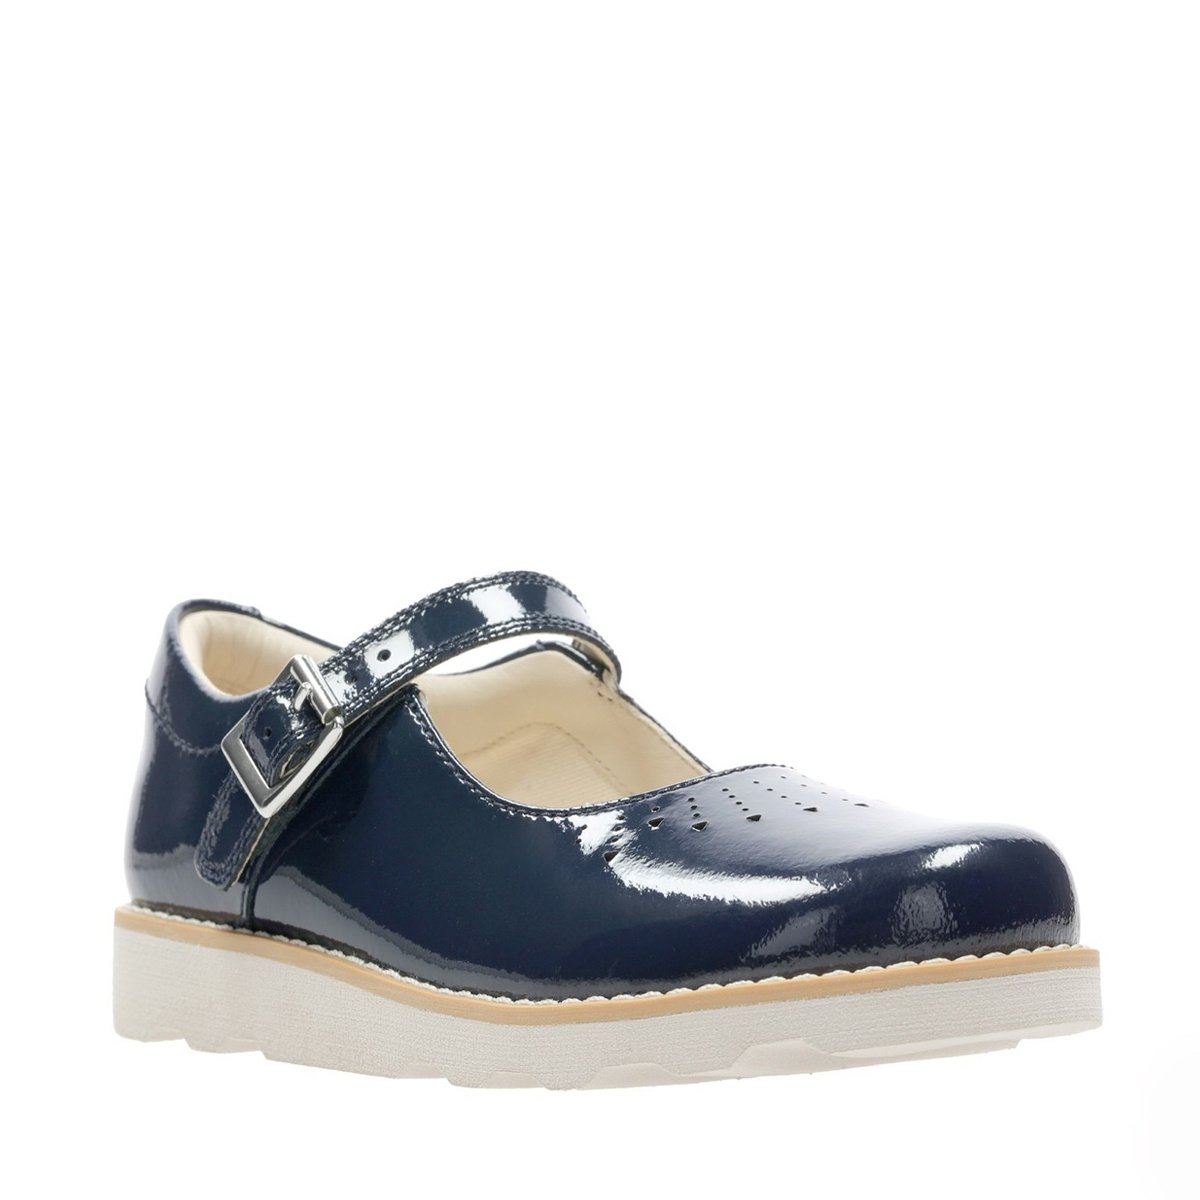 clarks navy t bar shoes